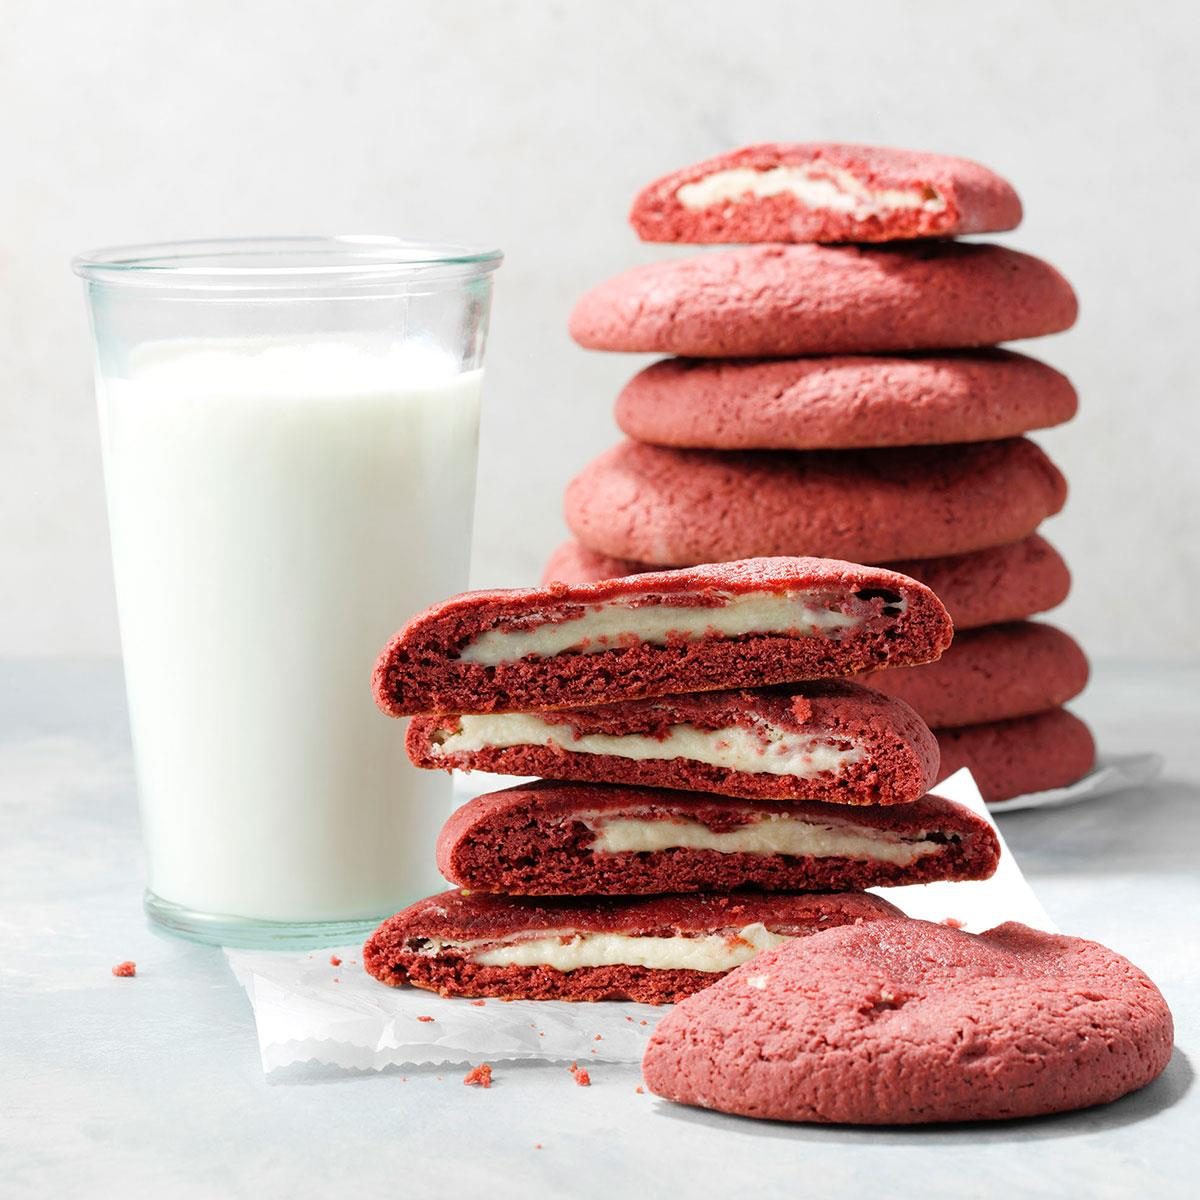 Red Velvet Cheesecake Cookies Exps Rc23 271514 Dr 07 20 12b